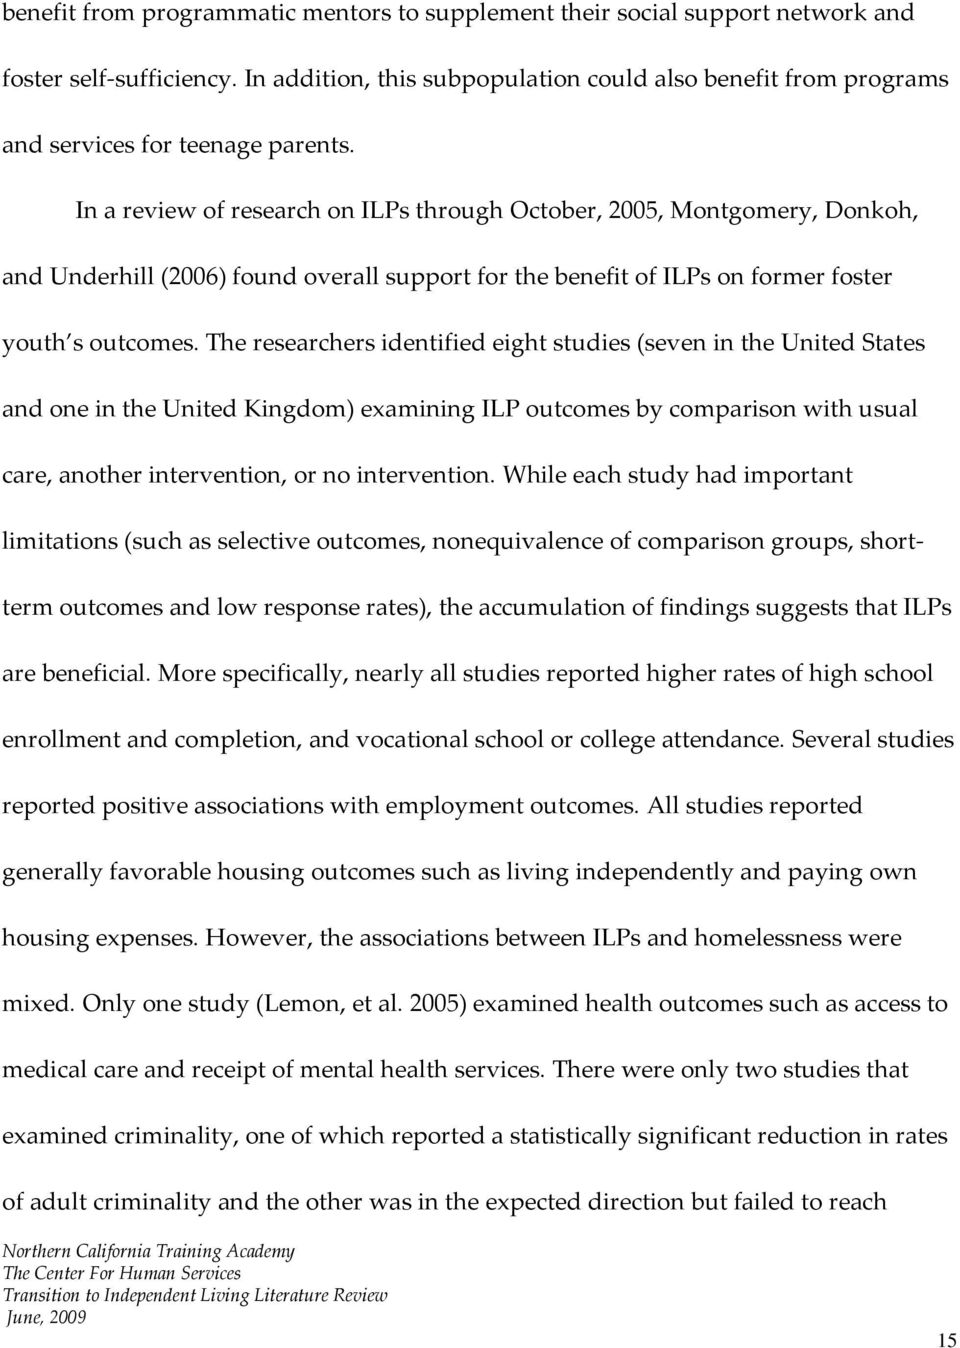 In a review of research on ILPs through October, 2005, Montgomery, Donkoh, and Underhill (2006) found overall support for the benefit of ILPs on former foster youth s outcomes.